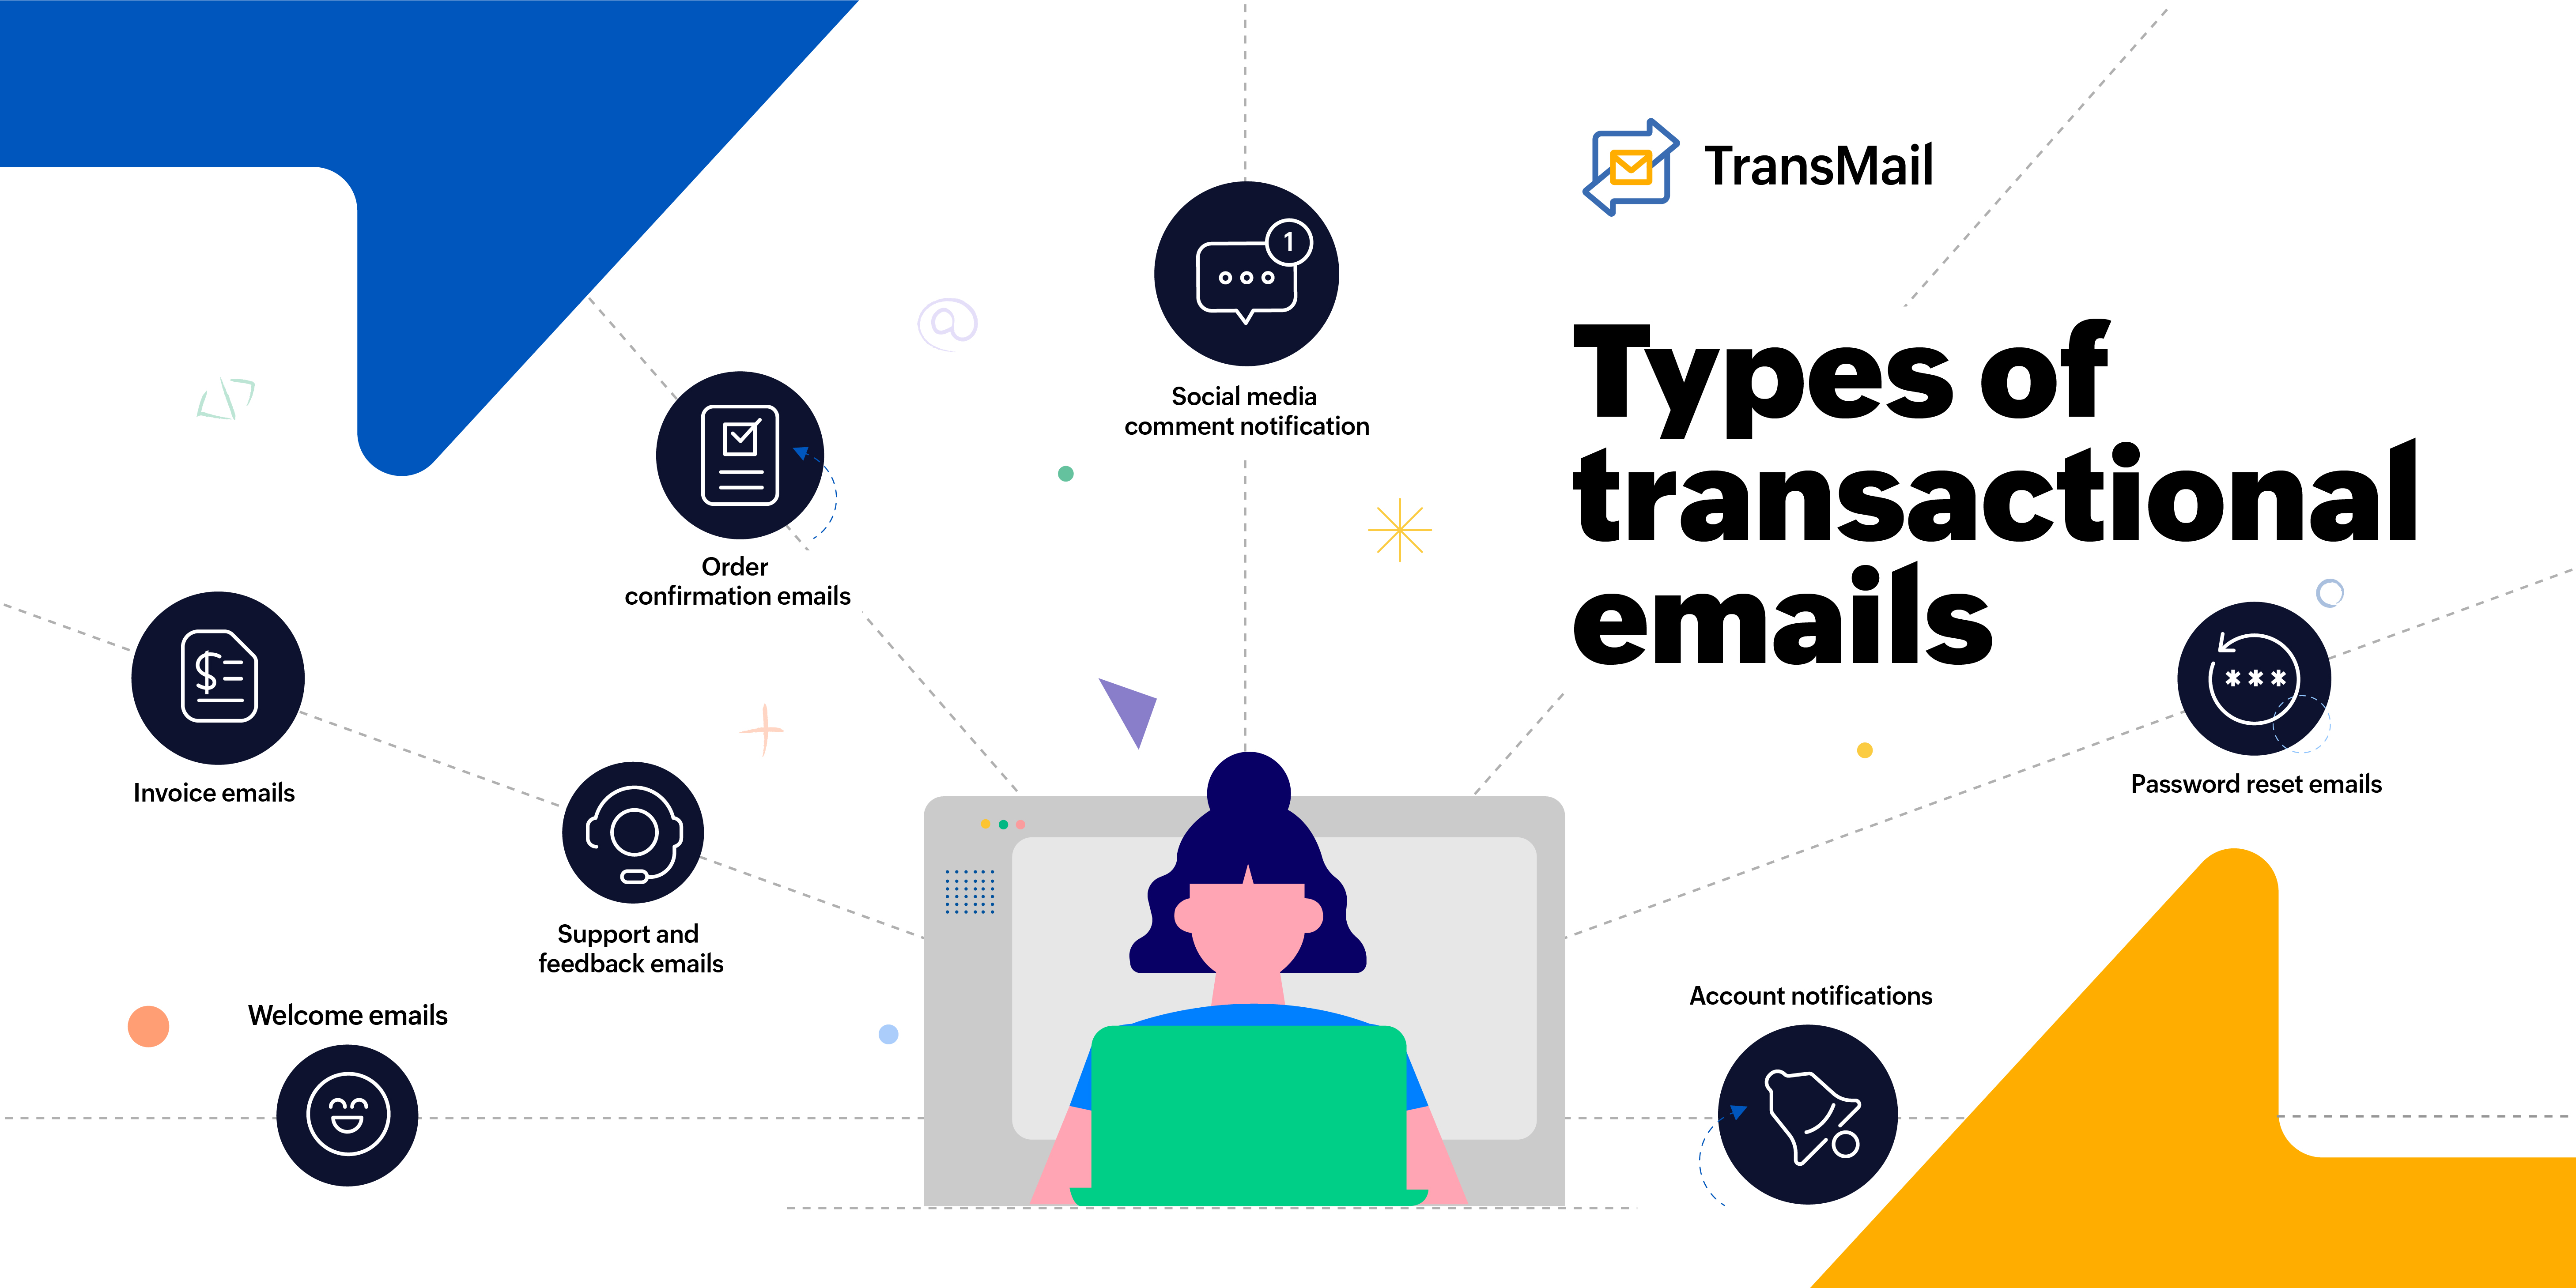 What are the types of transactional emails?